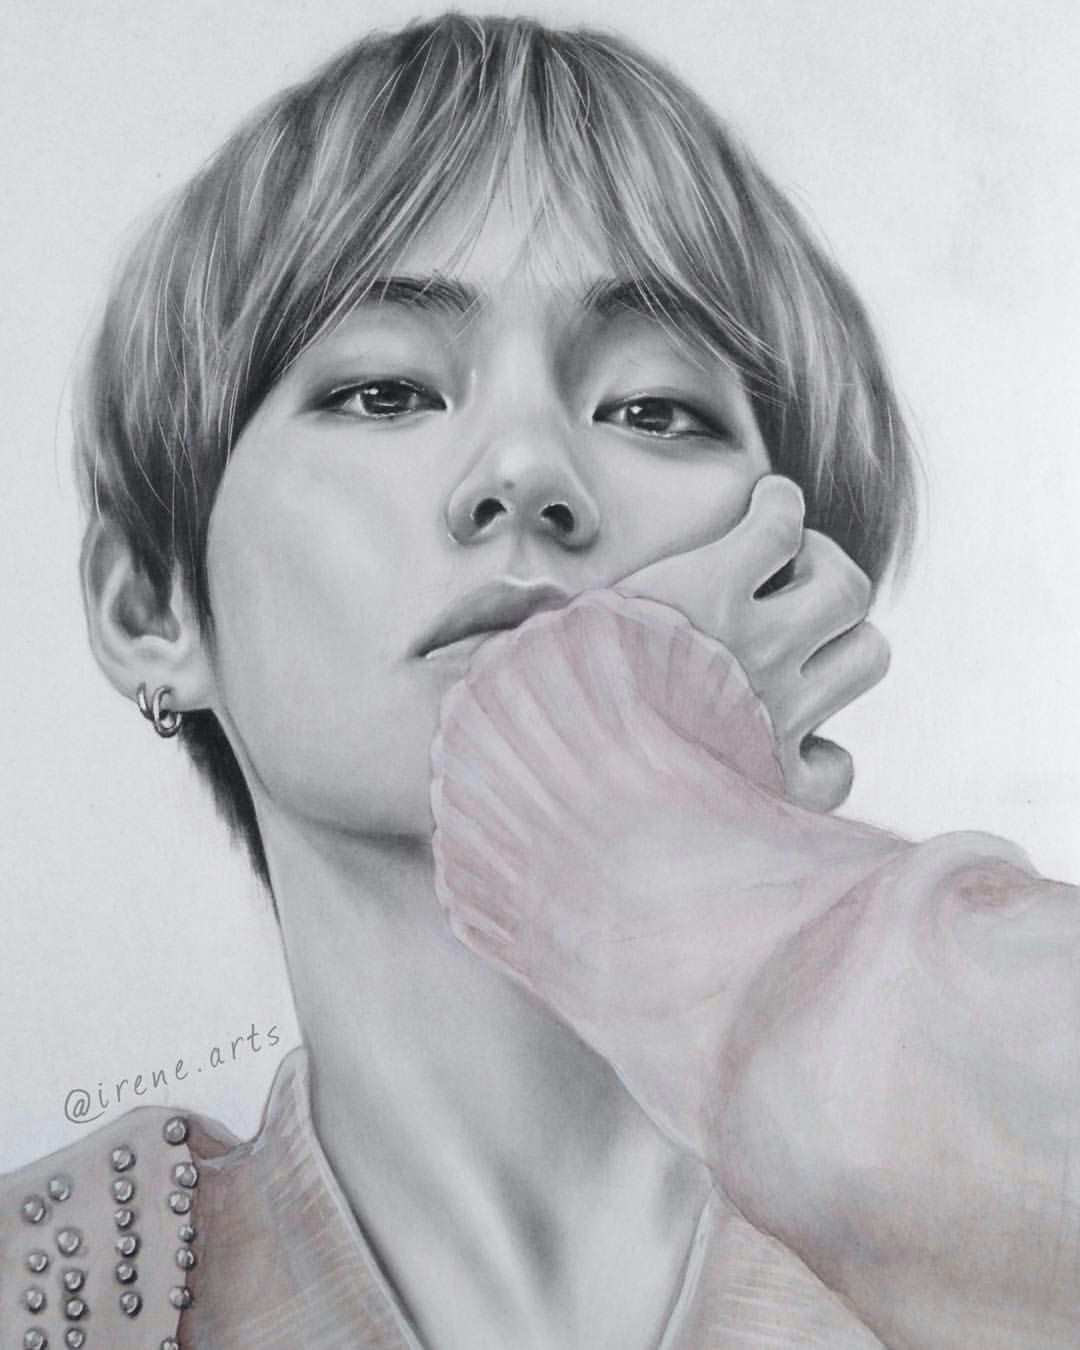 Bts V Eyes Drawing Pin by A On Bts Pinterest Bts Drawings Bts and Bts Fans